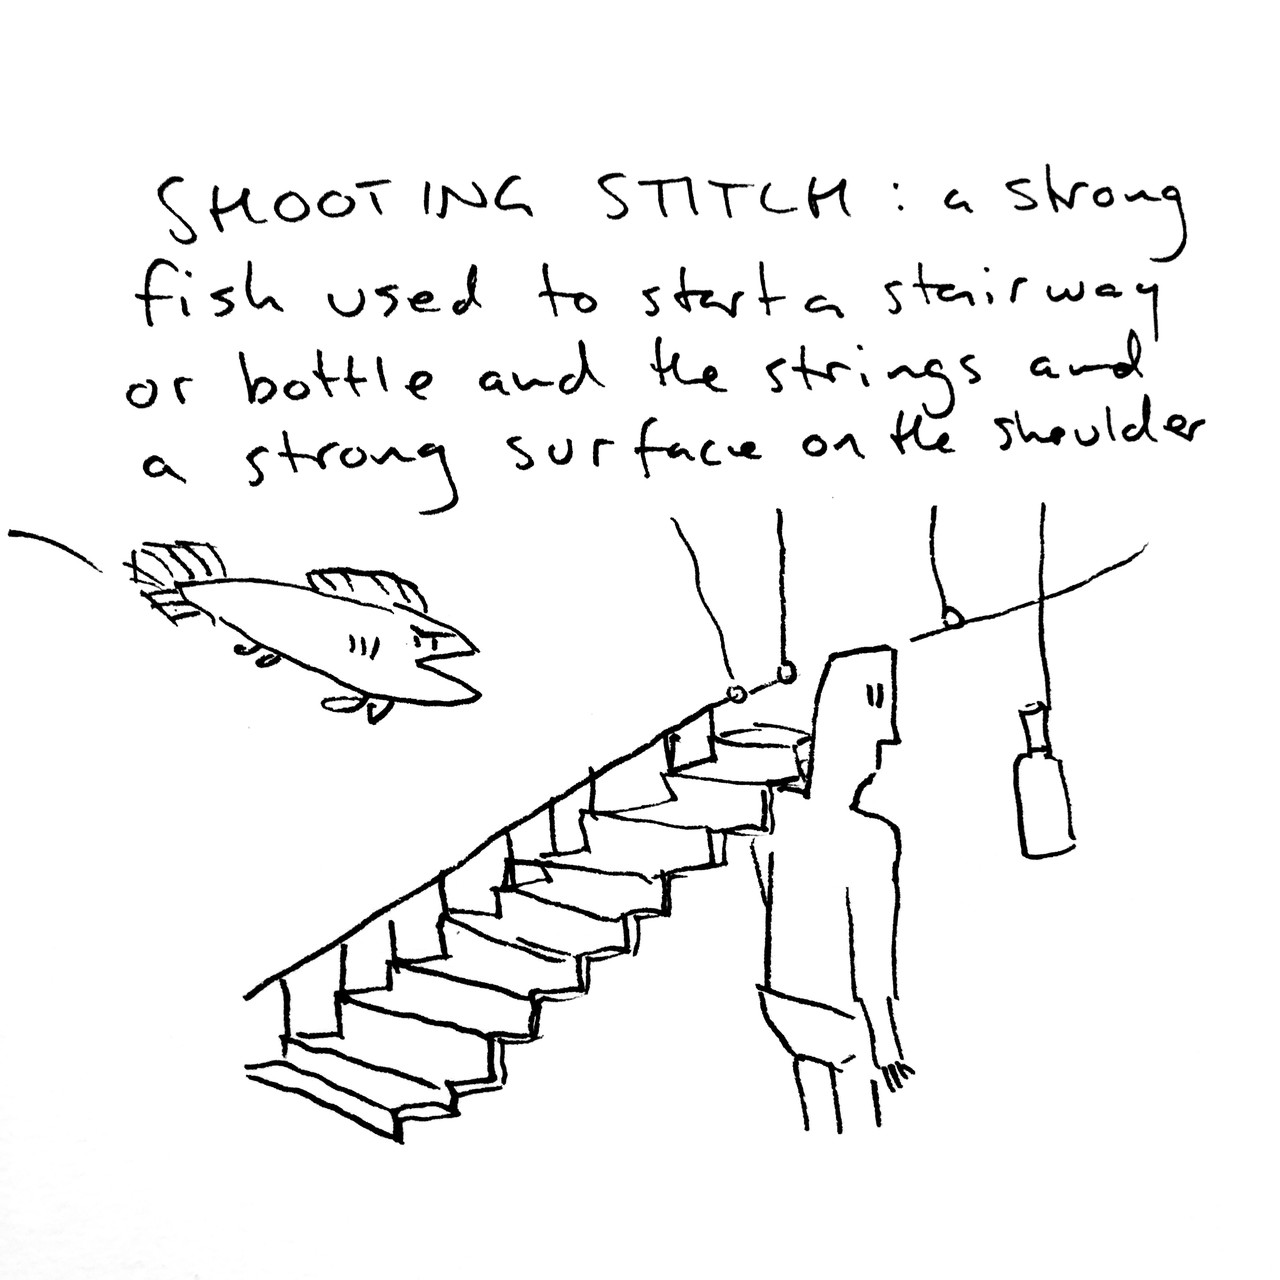 SHOOTING STITCH: a strong fish used to start a stairway or bottle and the strings and a strong surface on the shoulder. The drawing depicts a man with a staircase resting on his left shoulder. A series of strings extends upward from the top of the staircase and a bottle is suspended from a string to the right of the man. A fish is flying towards the staircase from the upper left.